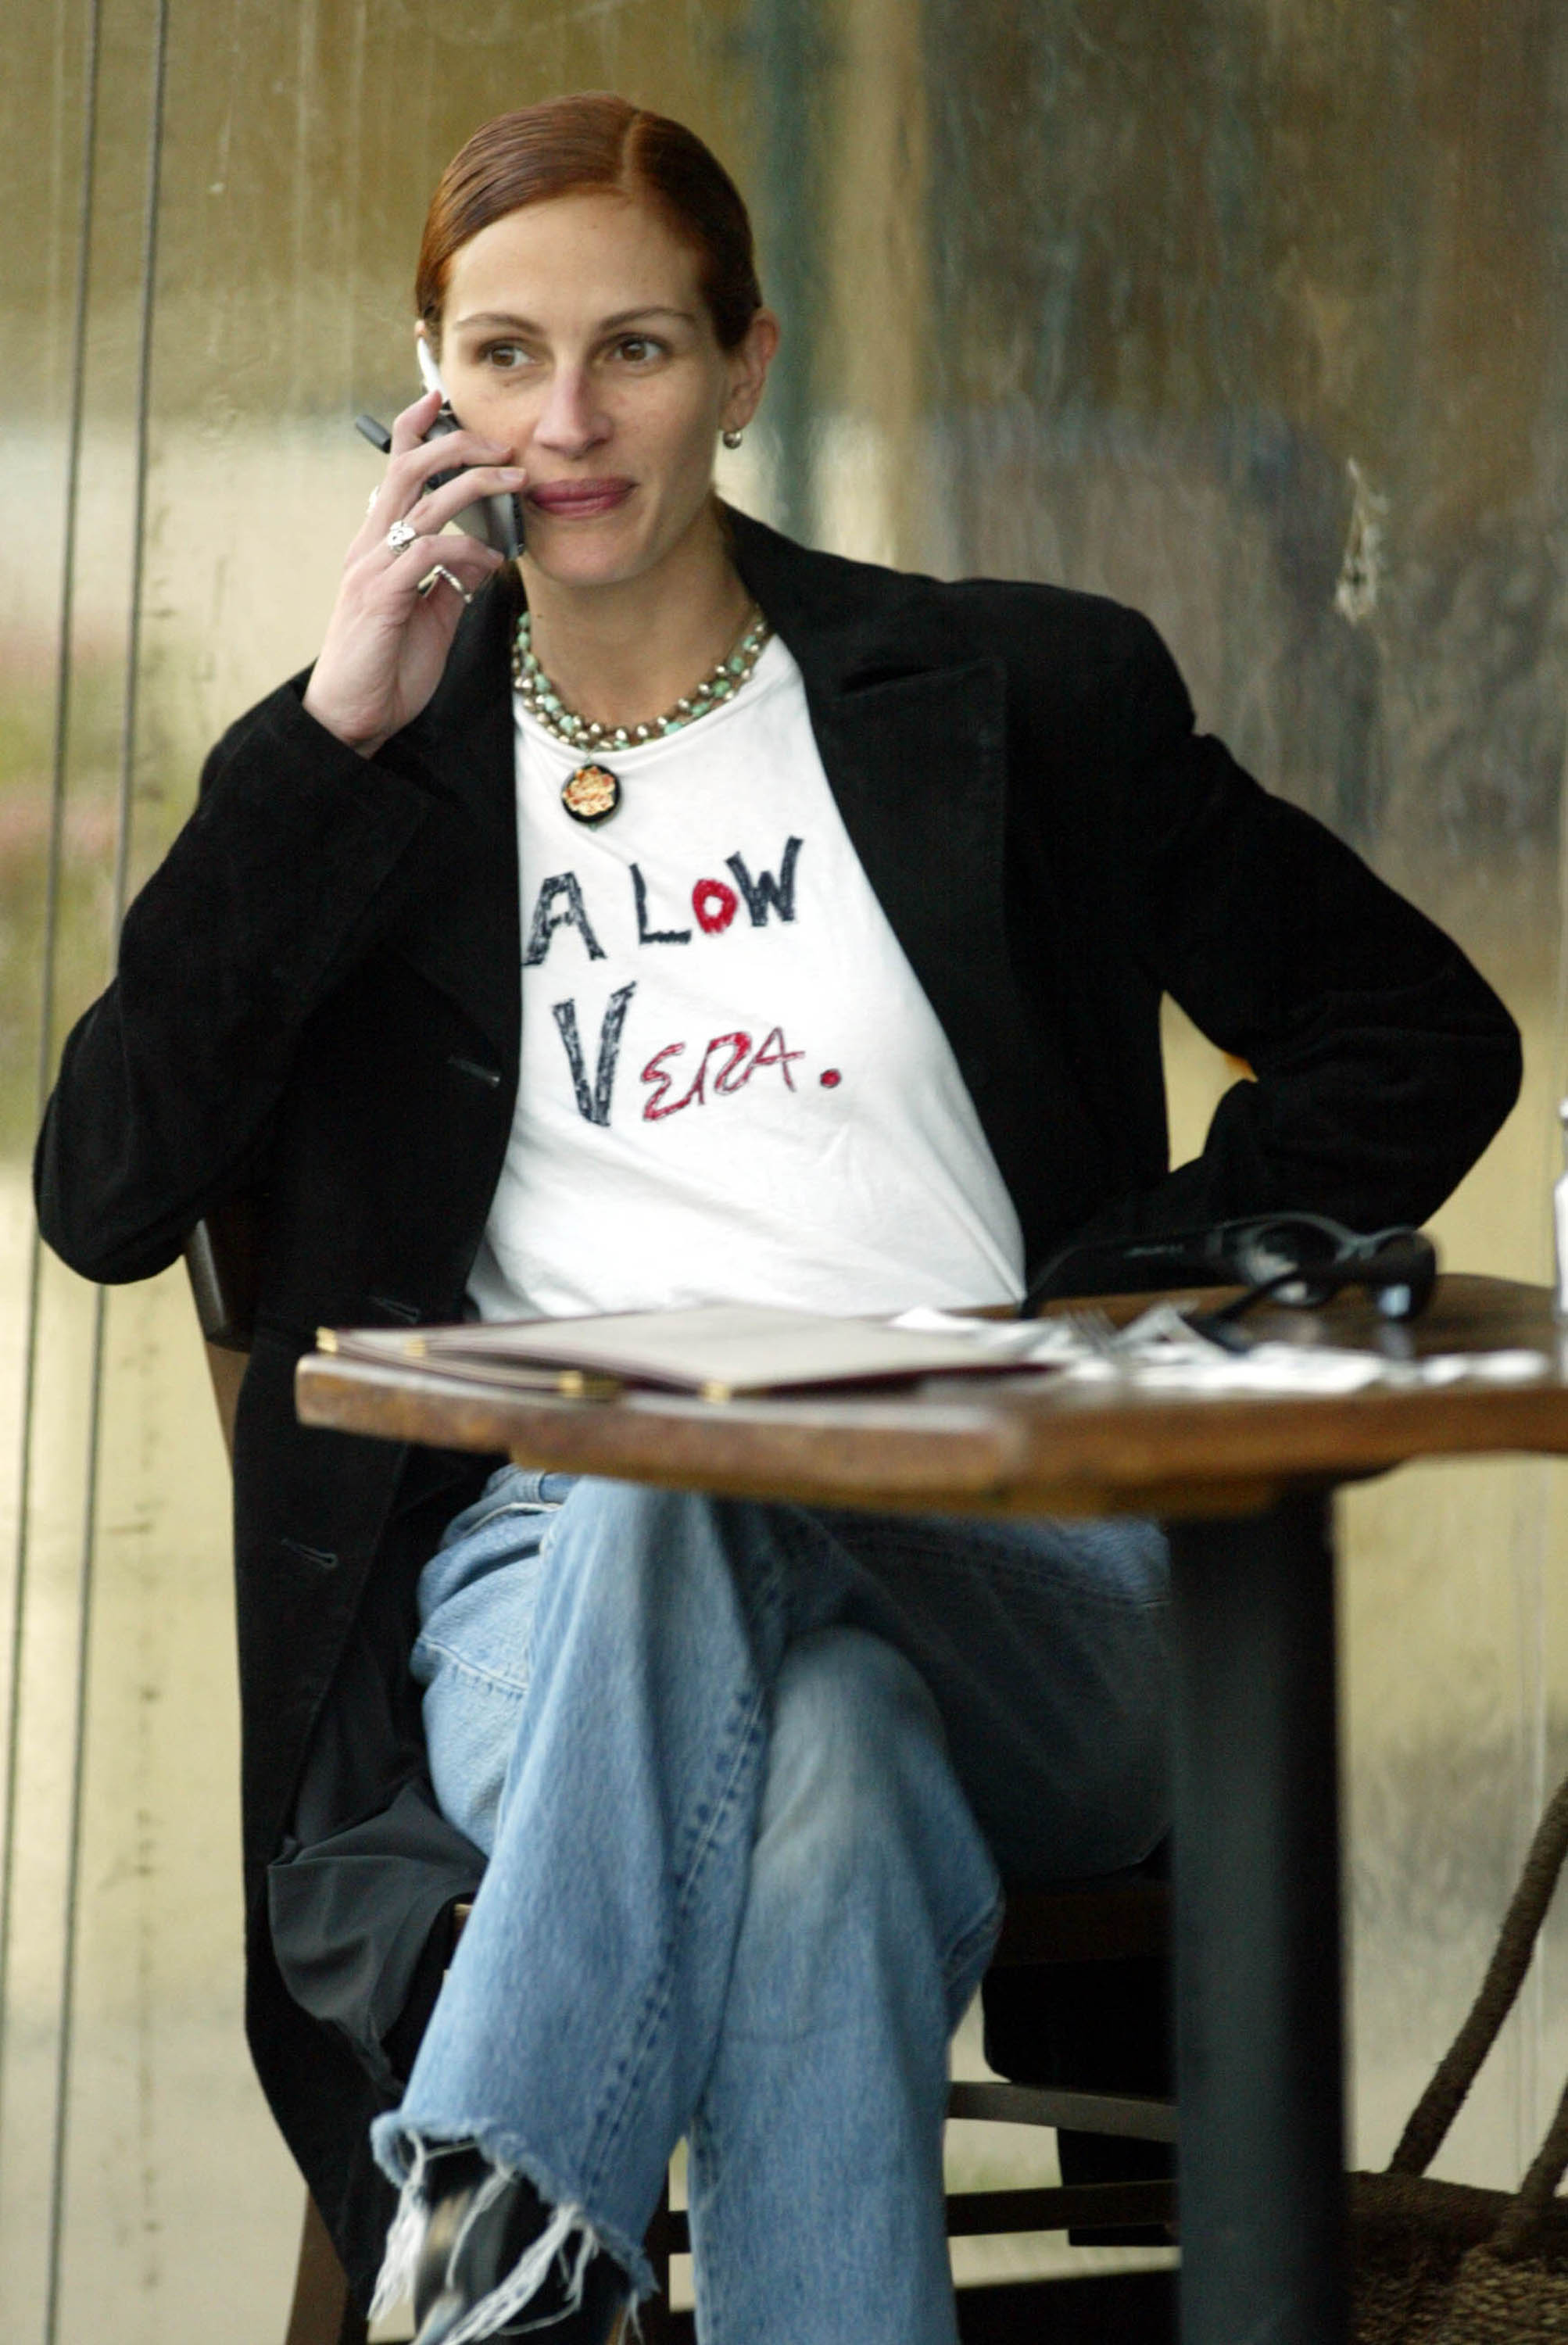 Another photo of Julia Roberts wearing the controversial T-shirt at The King's Road Cafe in West Hollywood, 2002 | Source: Getty Images